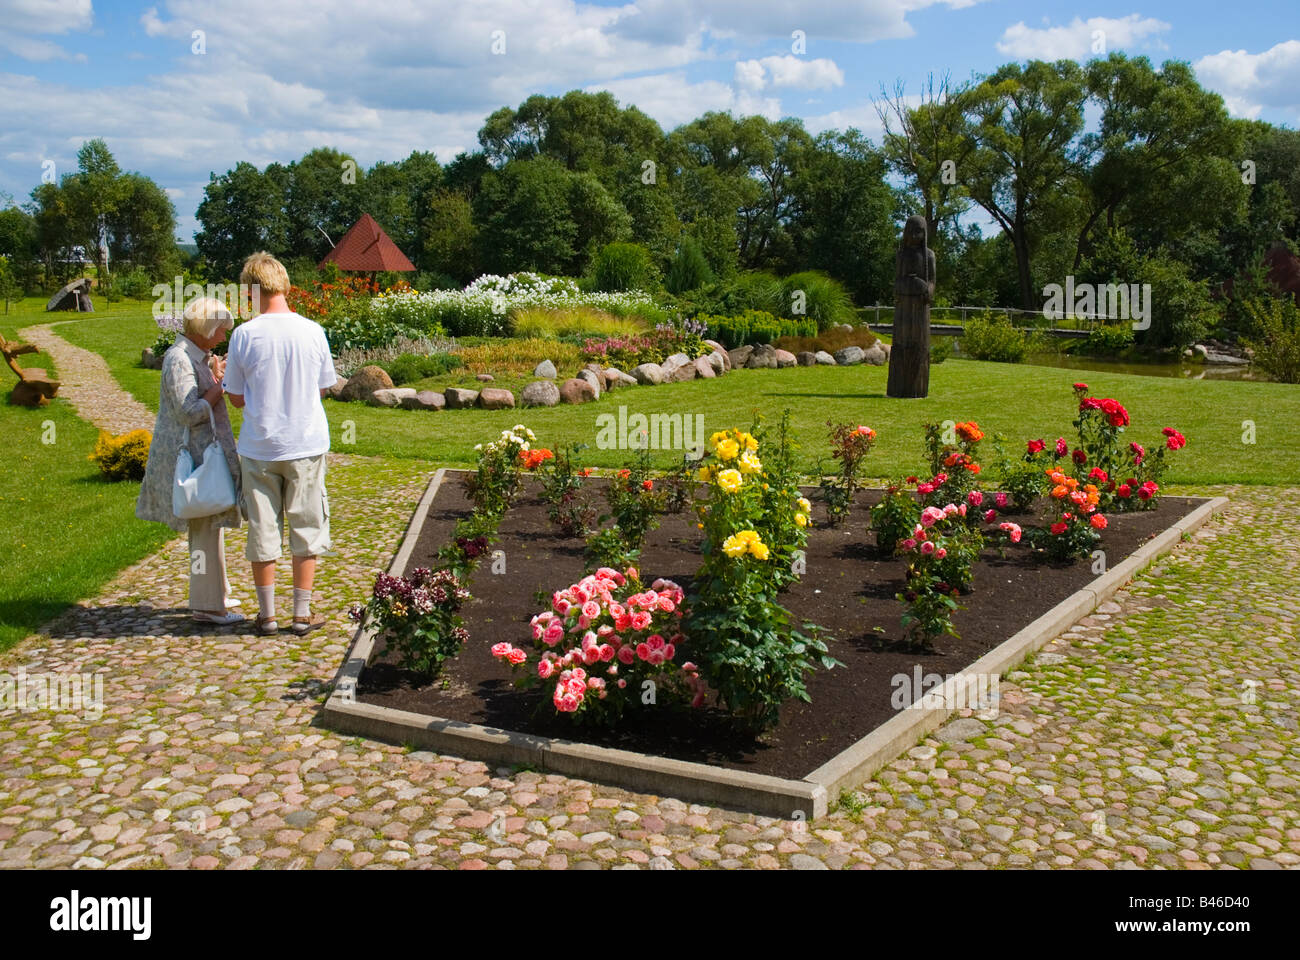 Garden at a rest stop in central Lithuania Europe Stock Photo